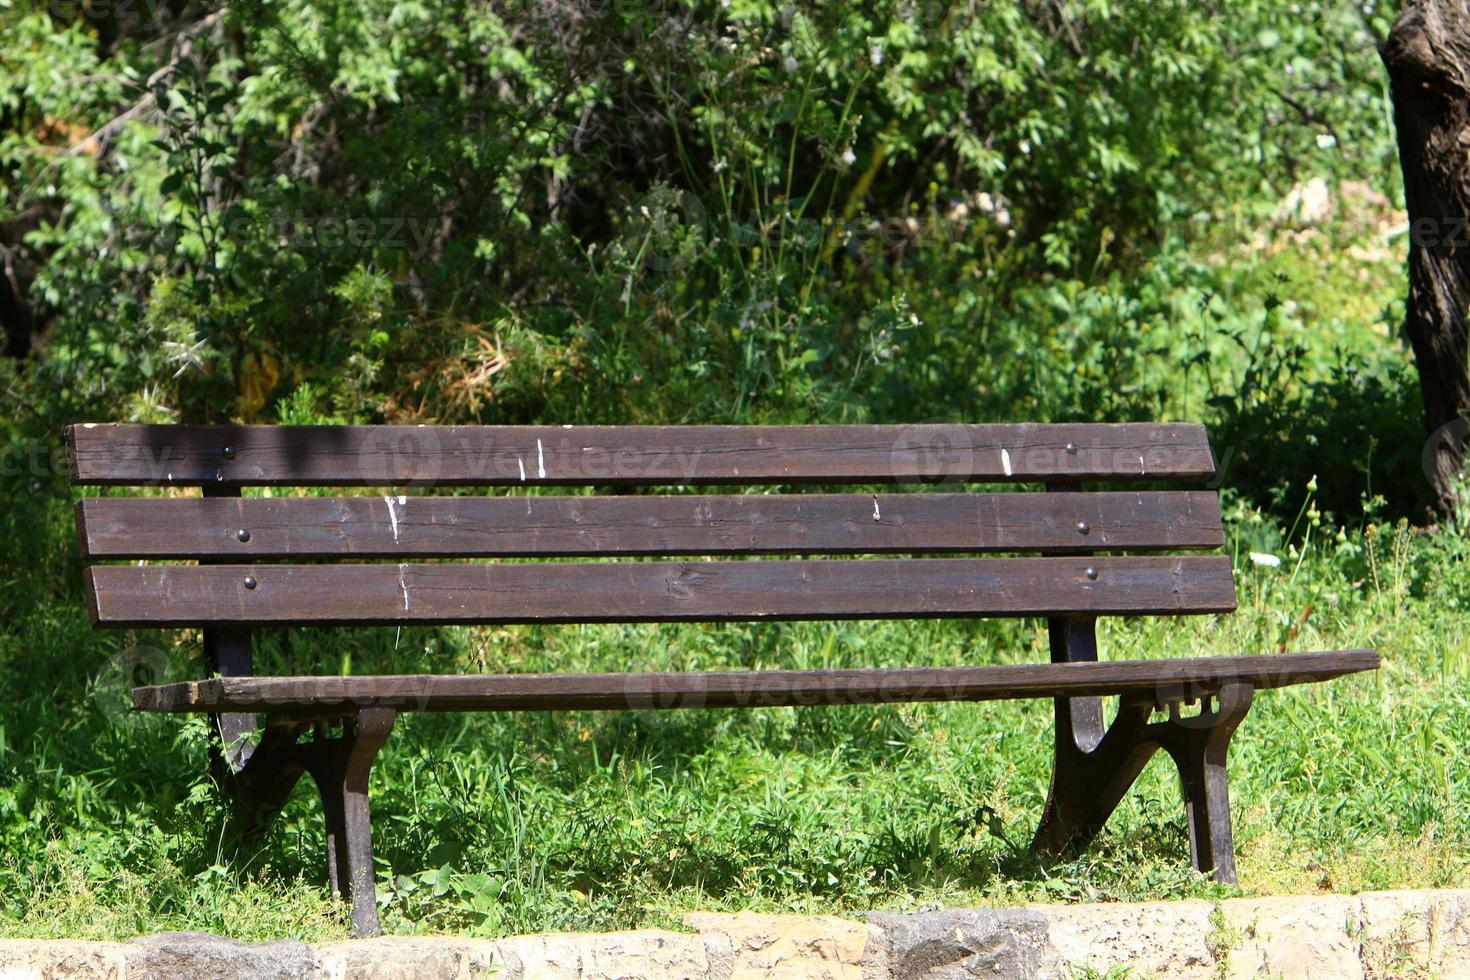 Bench for rest in the city park. photo